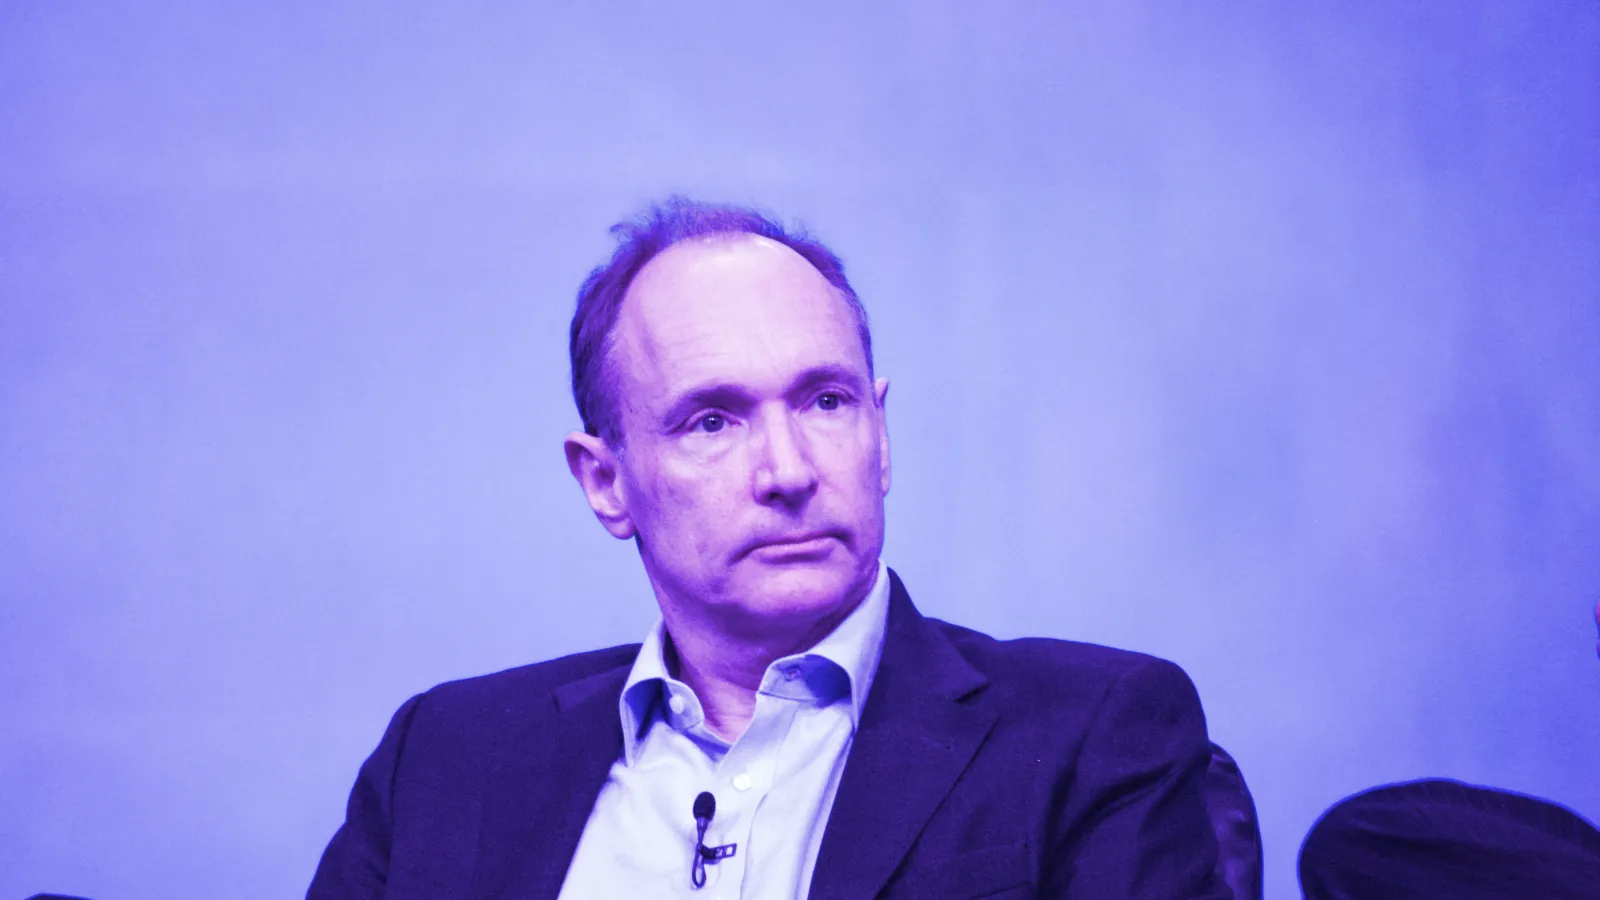 Tim Berners-Lee invented the World Wide Web. Image: Shutterstock